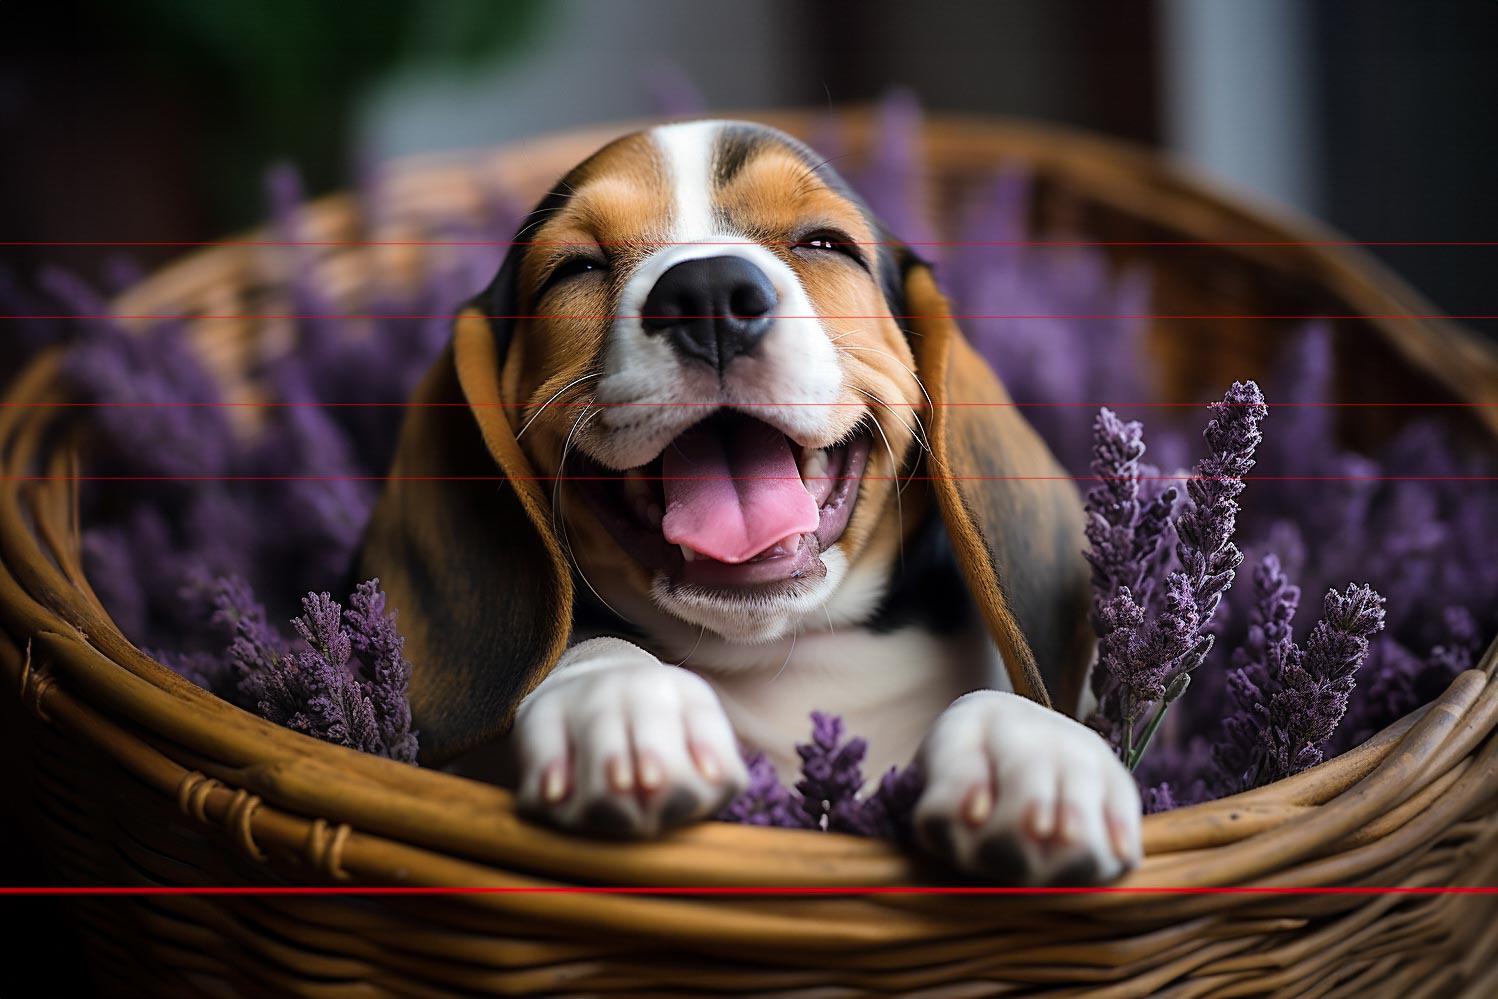 A cheerful beagle puppy with floppy ears is lying in a wicker basket filled with vibrant purple lavender flowers. The puppy's paws are draped over the edge of the basket, and it has its mouth open in what appears to be a joyful smile.